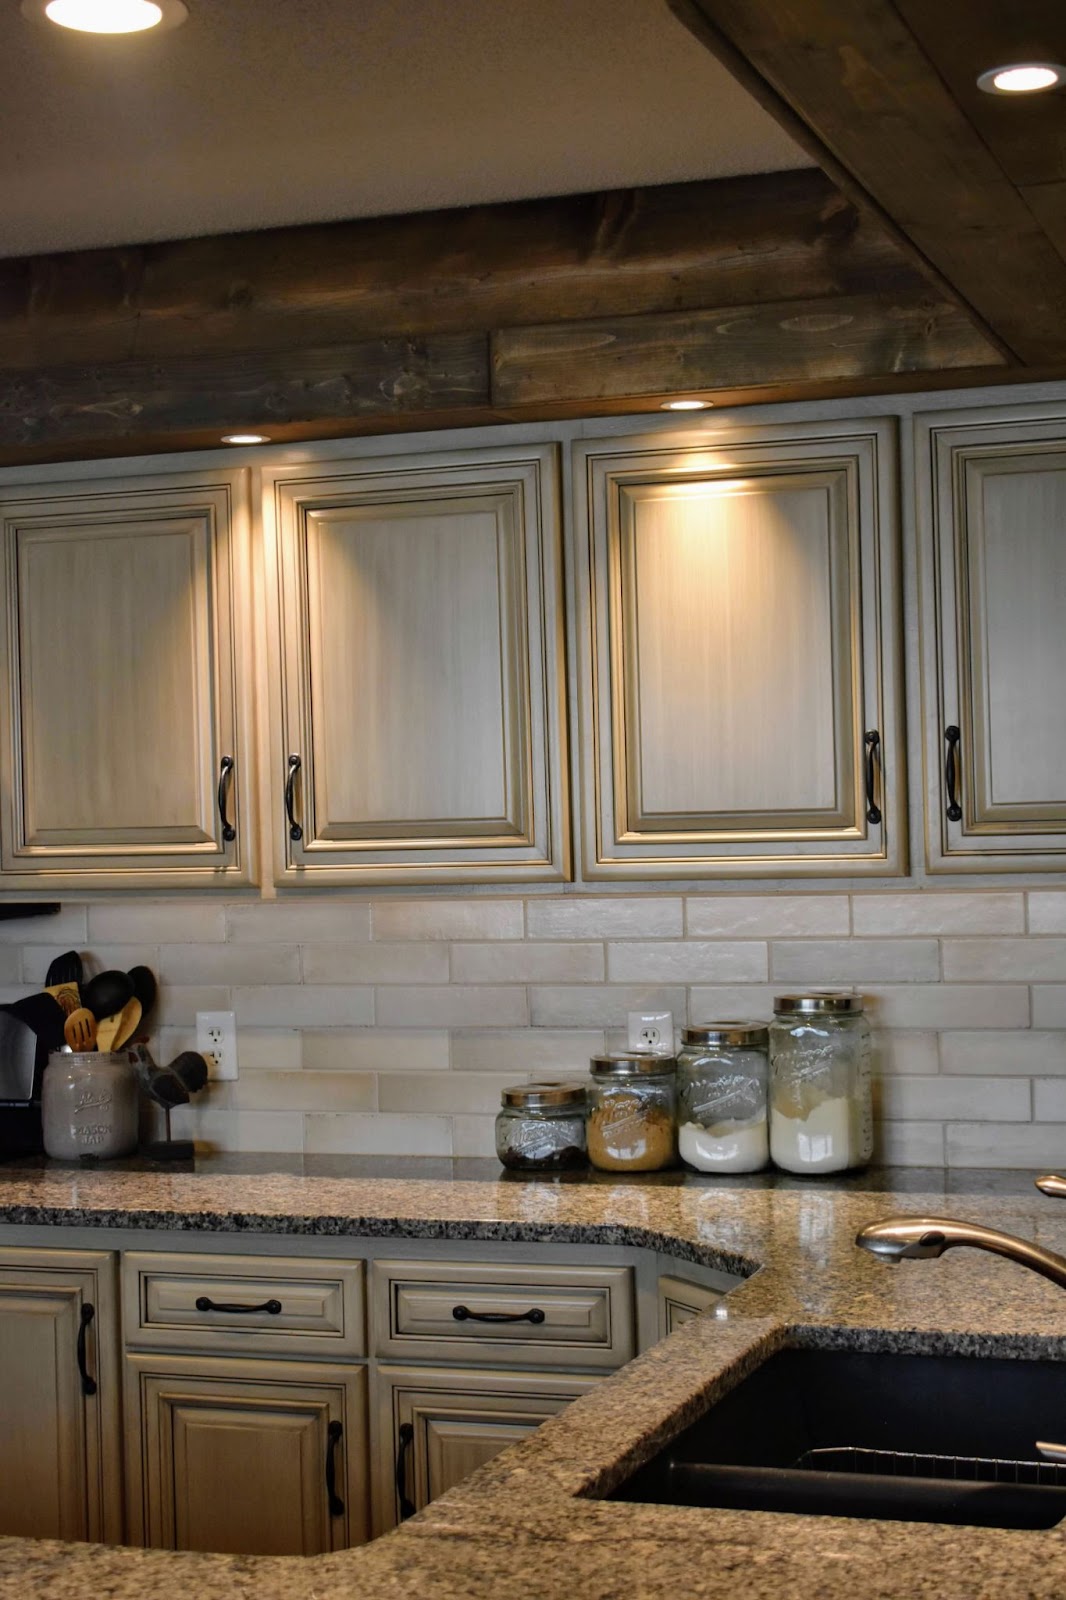 Warm-white, glazed and smooth kitchen cabinets with warm granite countertops and backsplash.